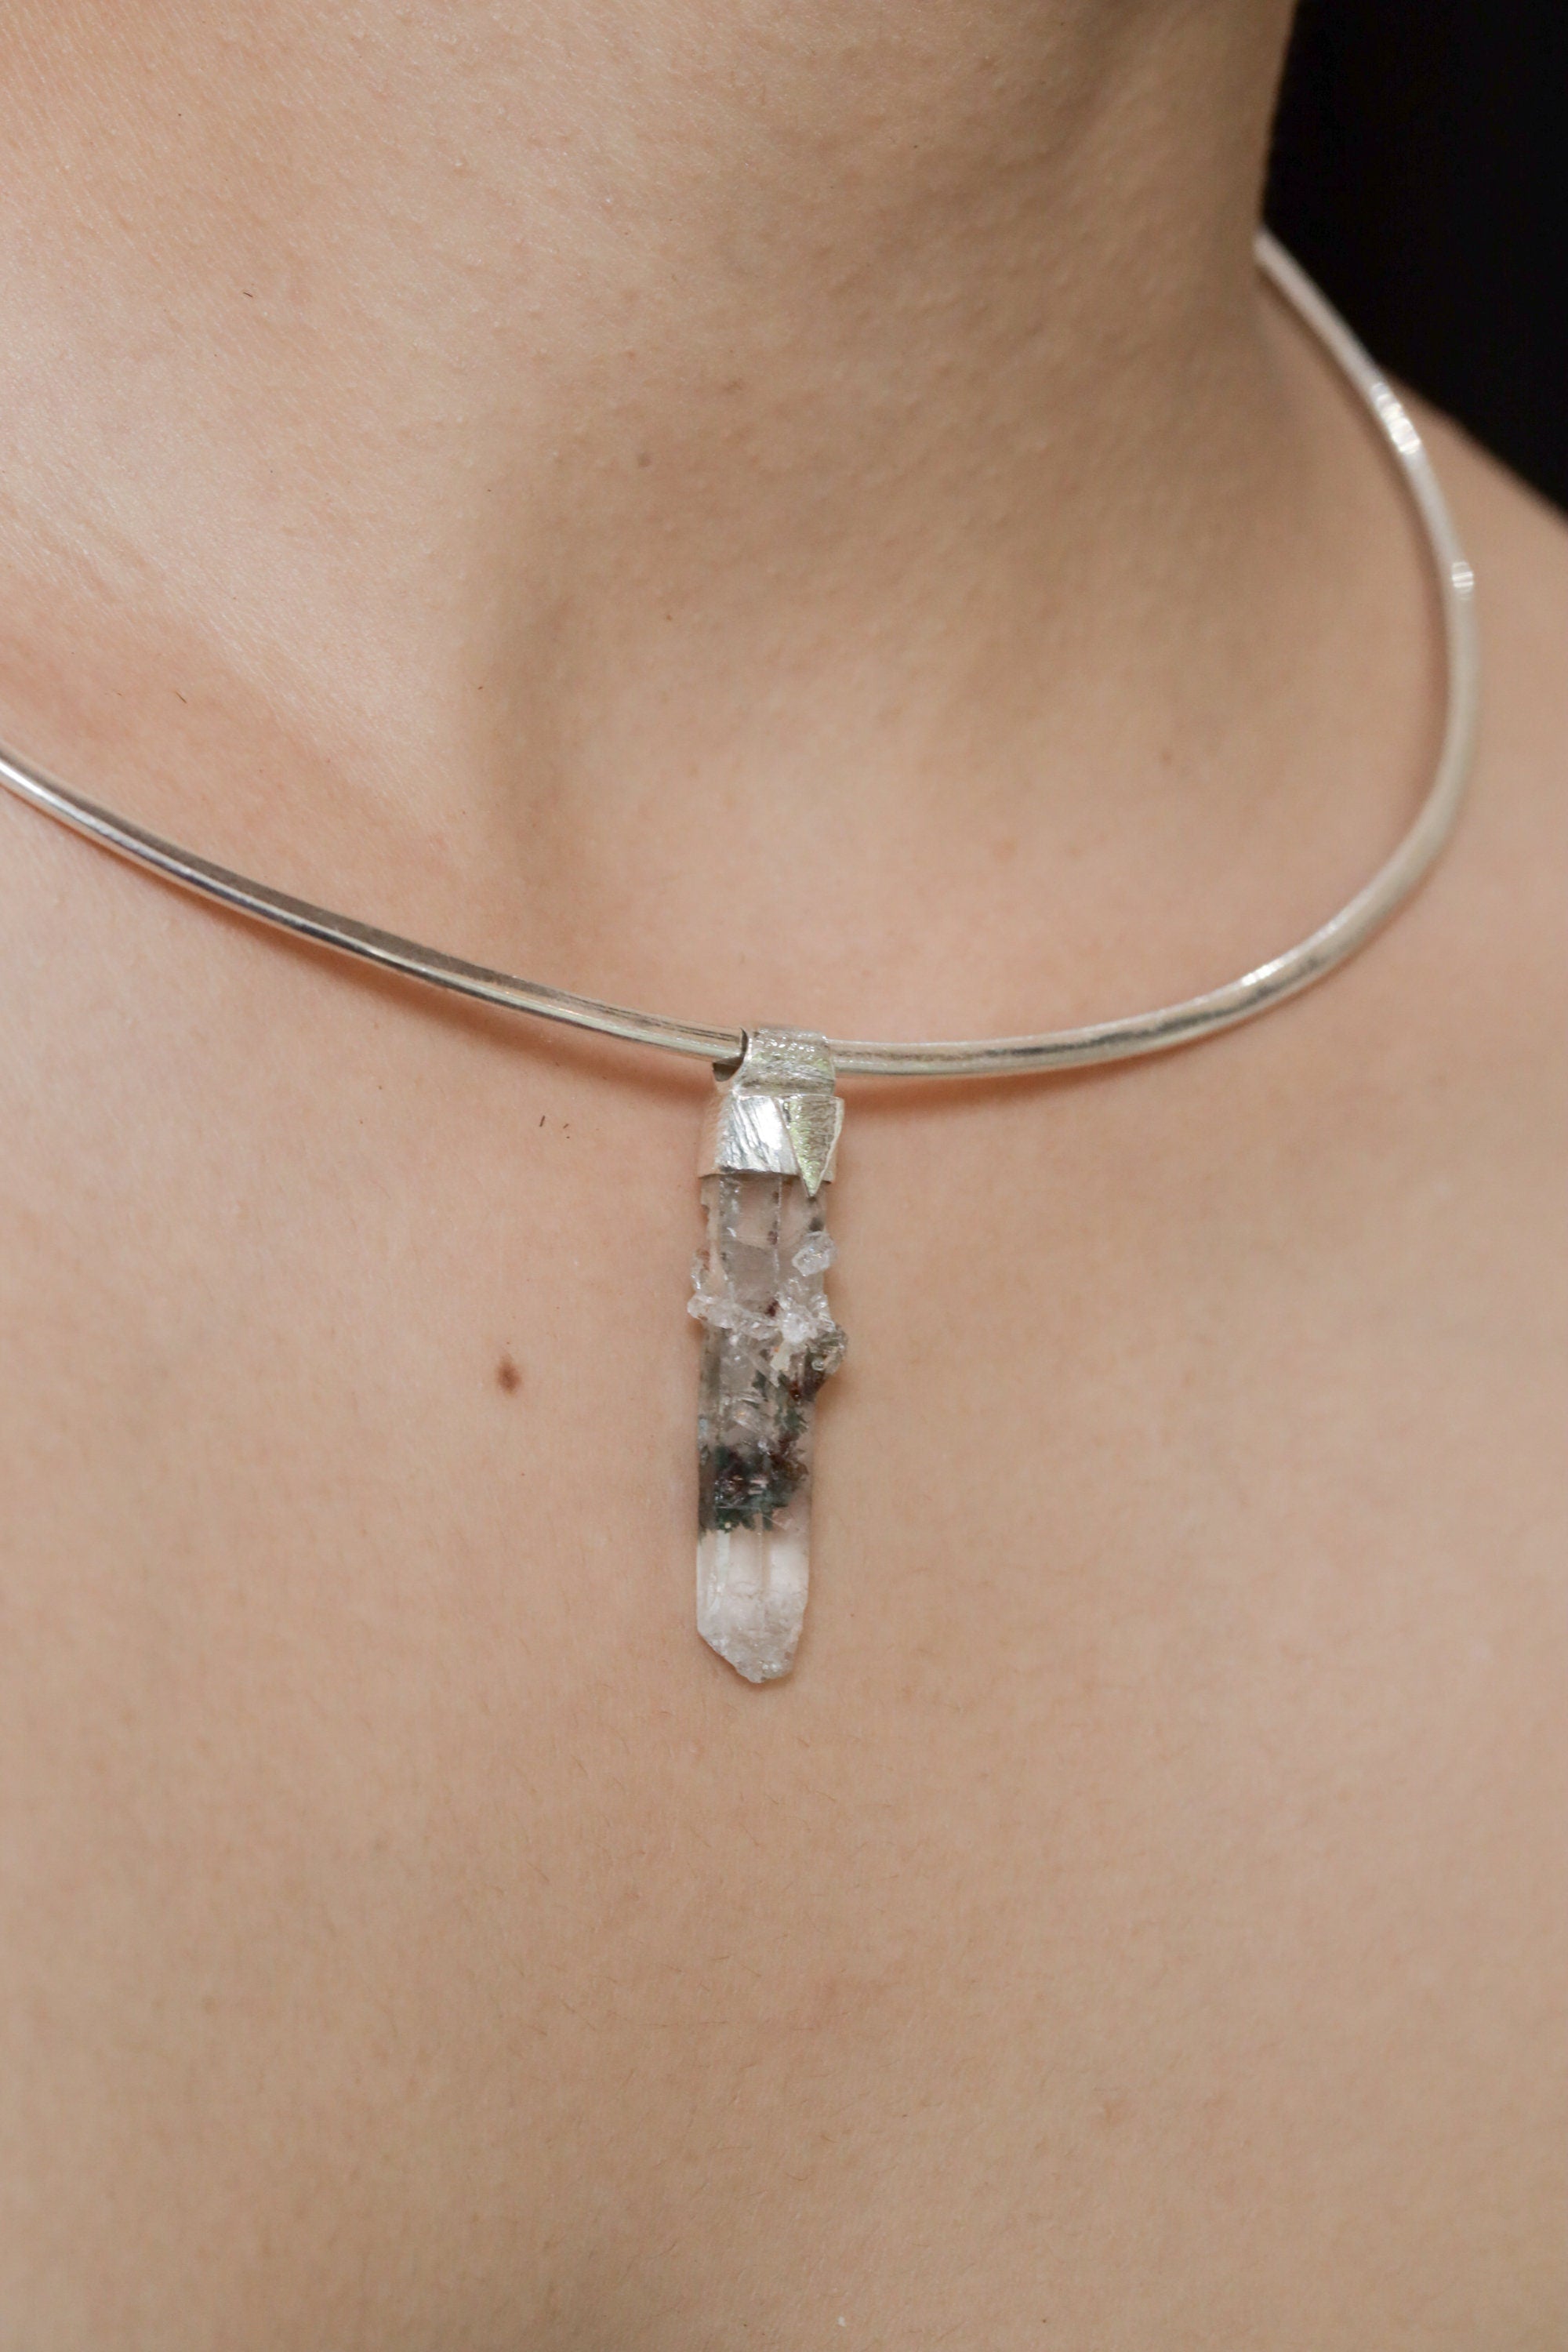 Himalayan Chlorite Drusy Quartz Point - Stack Pendant - Organic Textured 925 Sterling Silver - Crystal Necklace